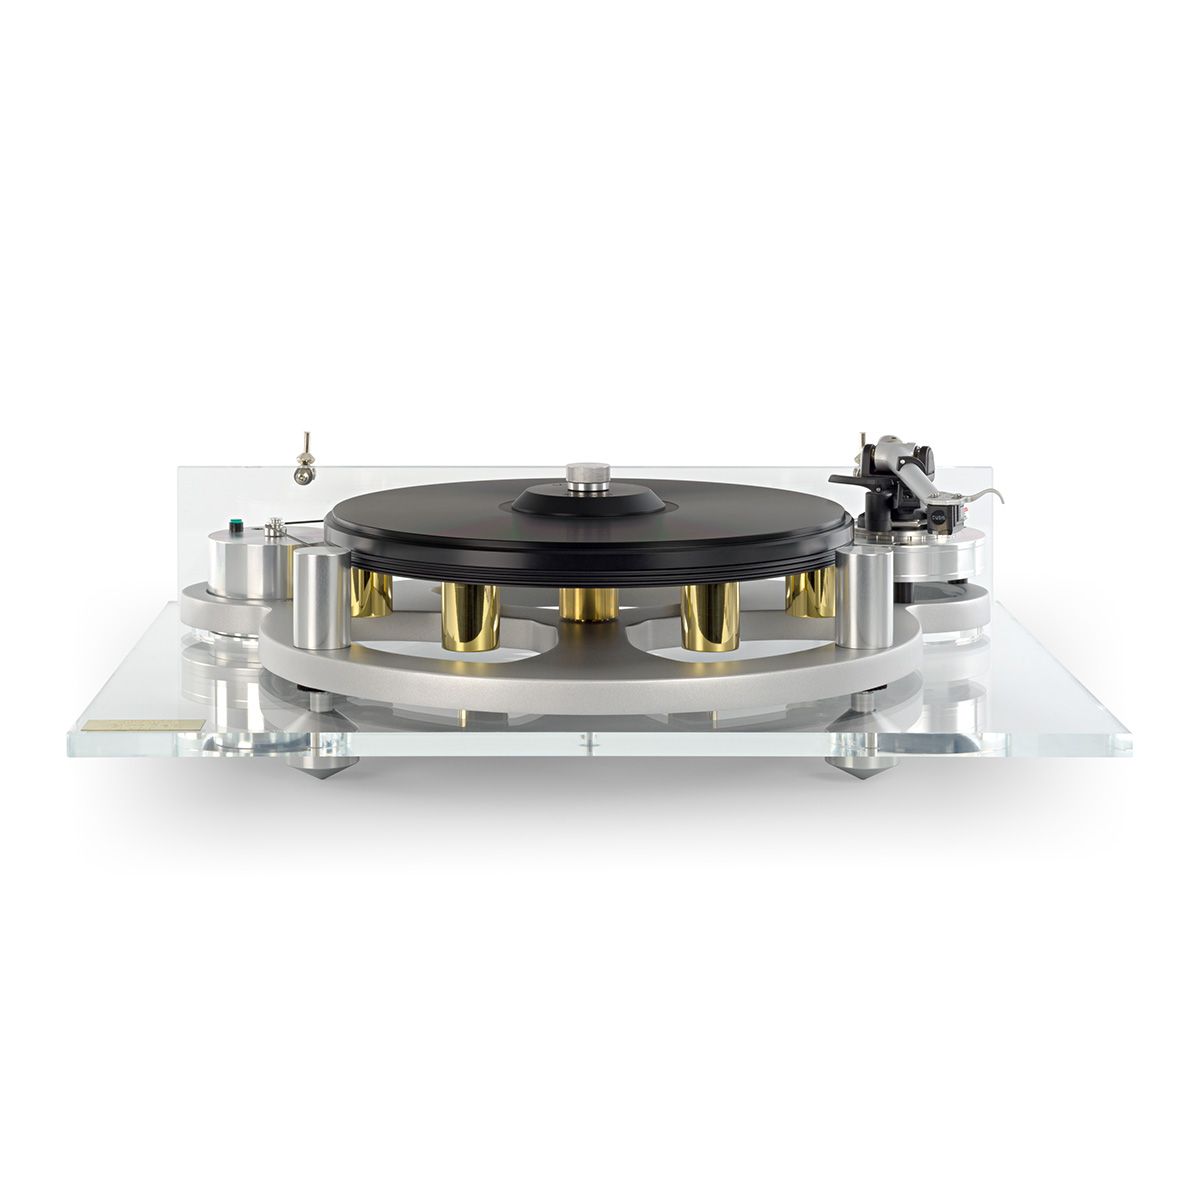 Michell Gyrodec Turntable in silver - side view